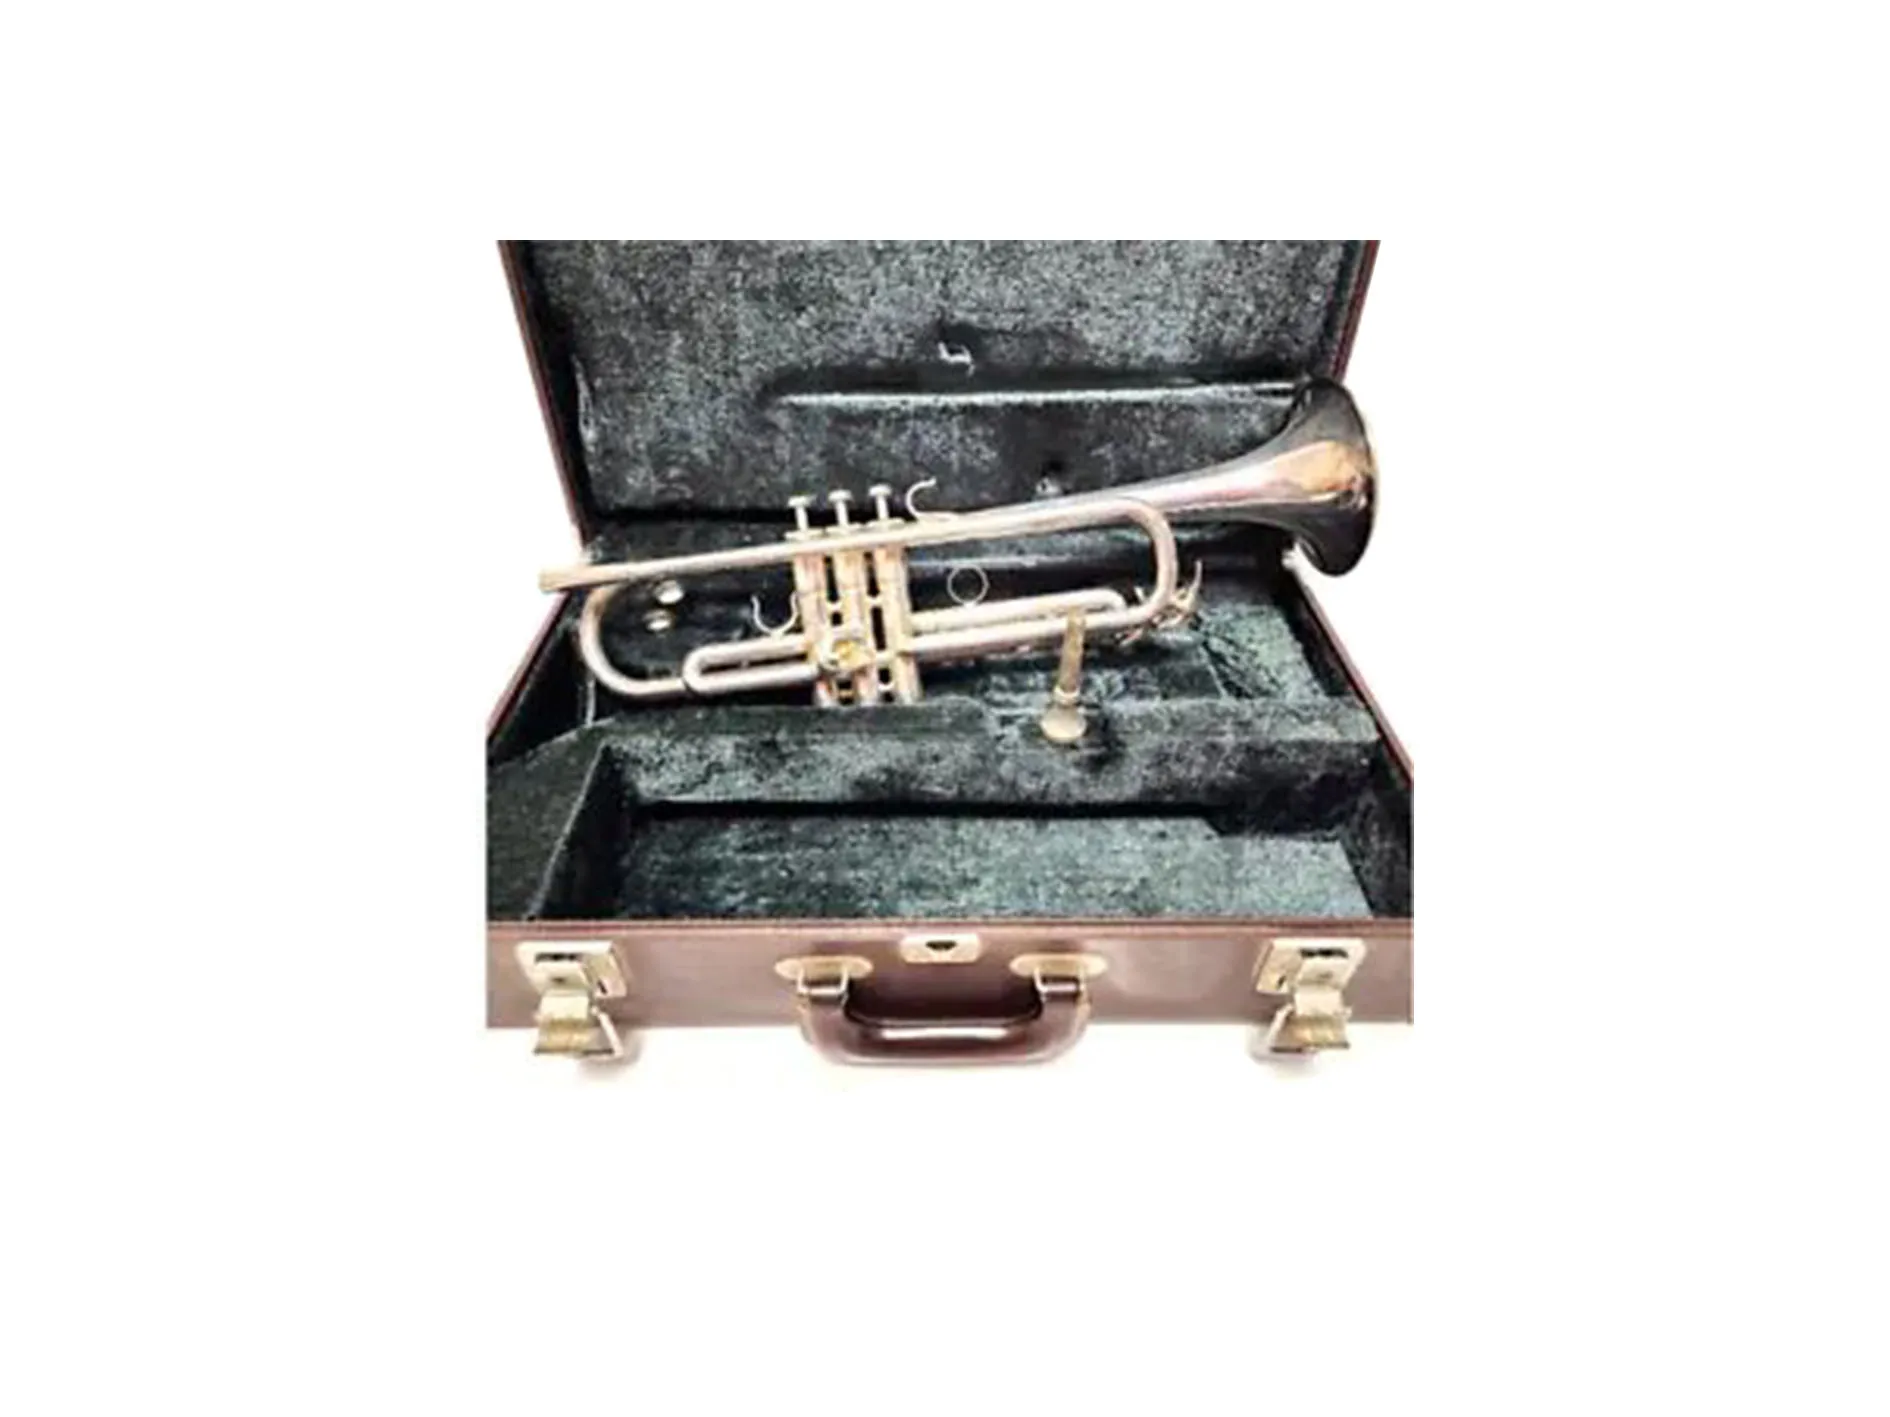 

YTR-737 Trumpet Silver Plated Mouthpeace Musical instrument Hard case GAK